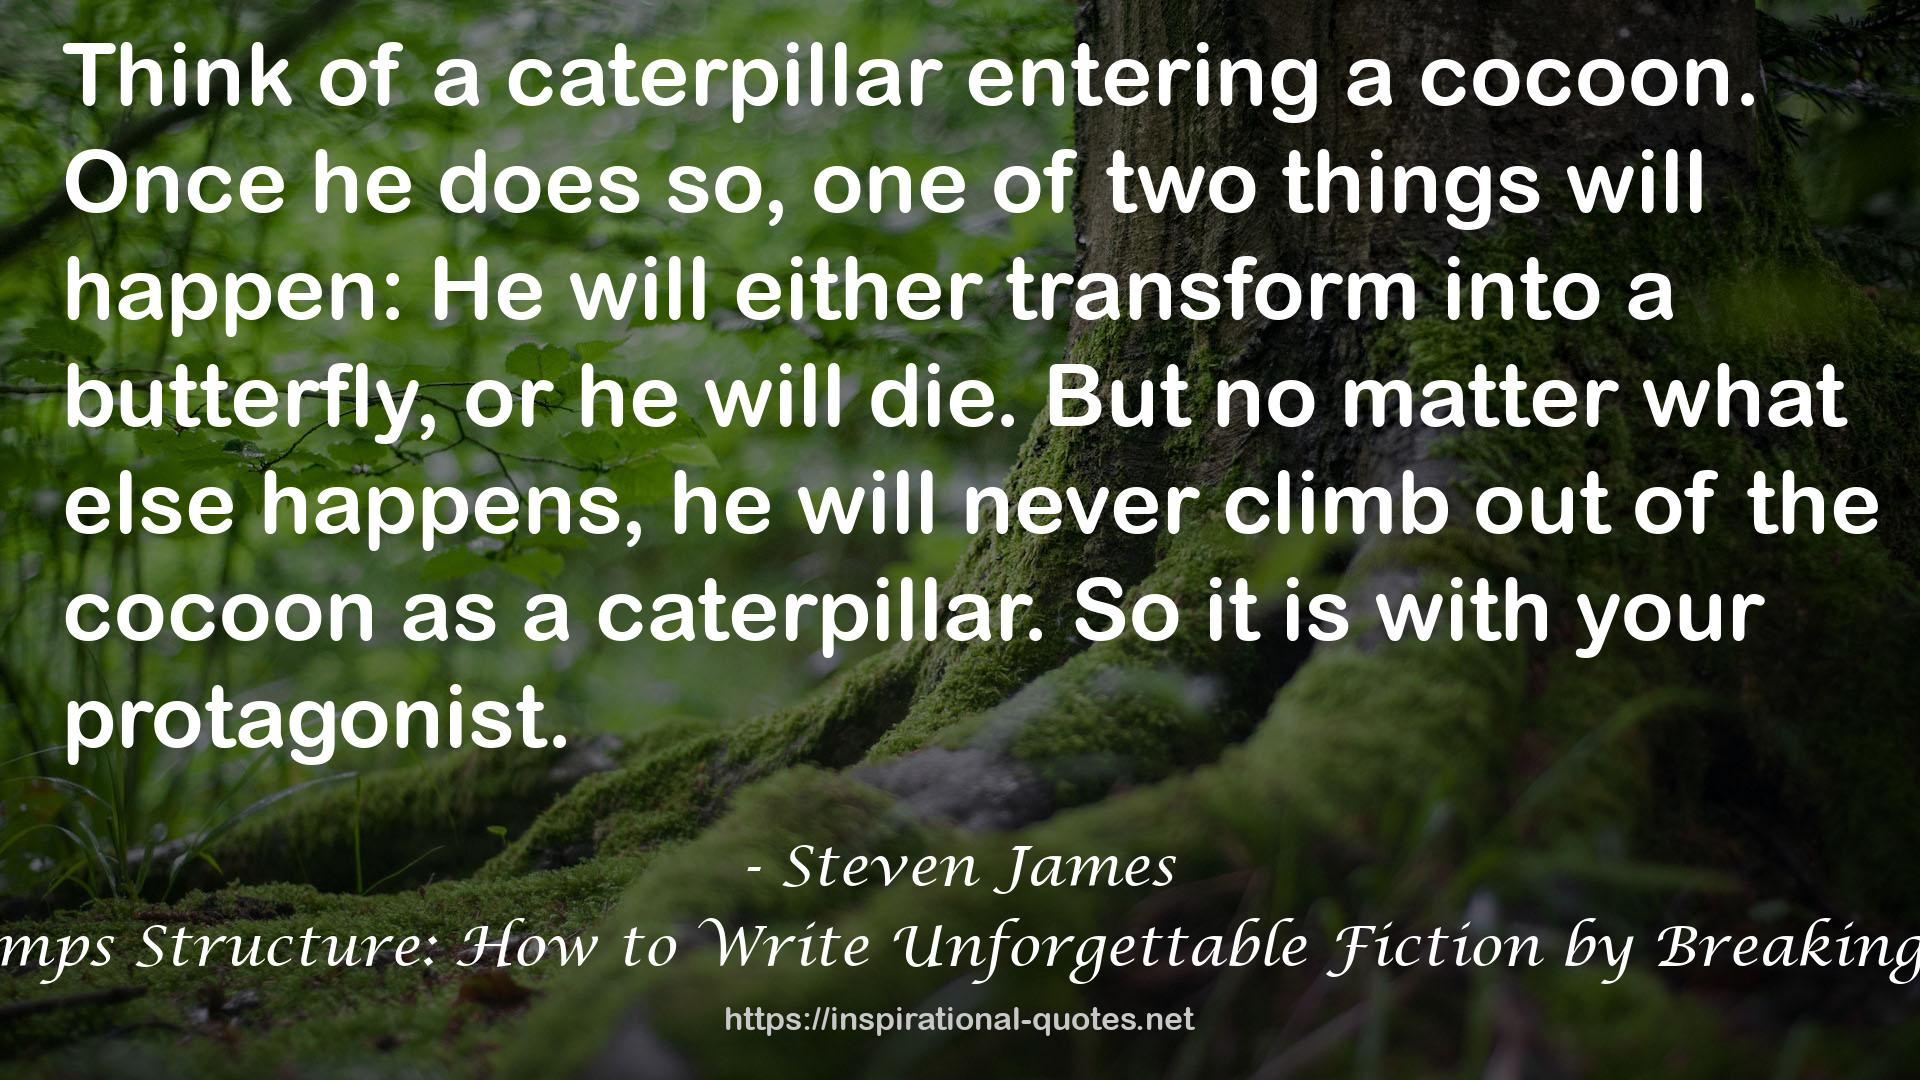 Story Trumps Structure: How to Write Unforgettable Fiction by Breaking the Rules QUOTES